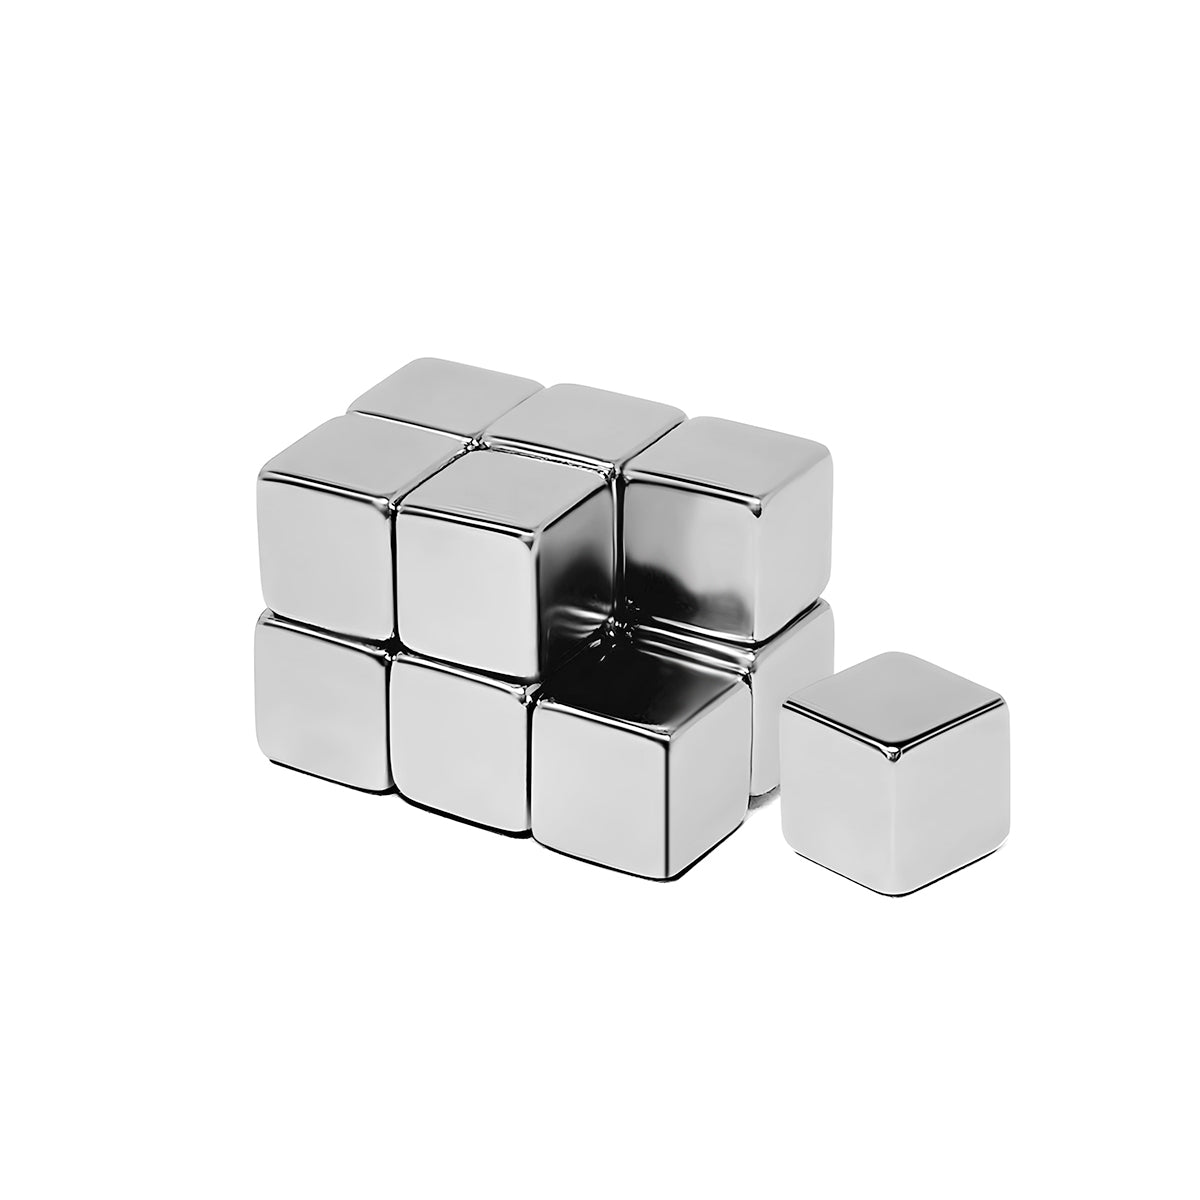 Wrapables Cube Neodymium Magnets, Strong Magnets for Refrigerator, Whiteboards, Crafts, Science Projects Set of 30 (Small)